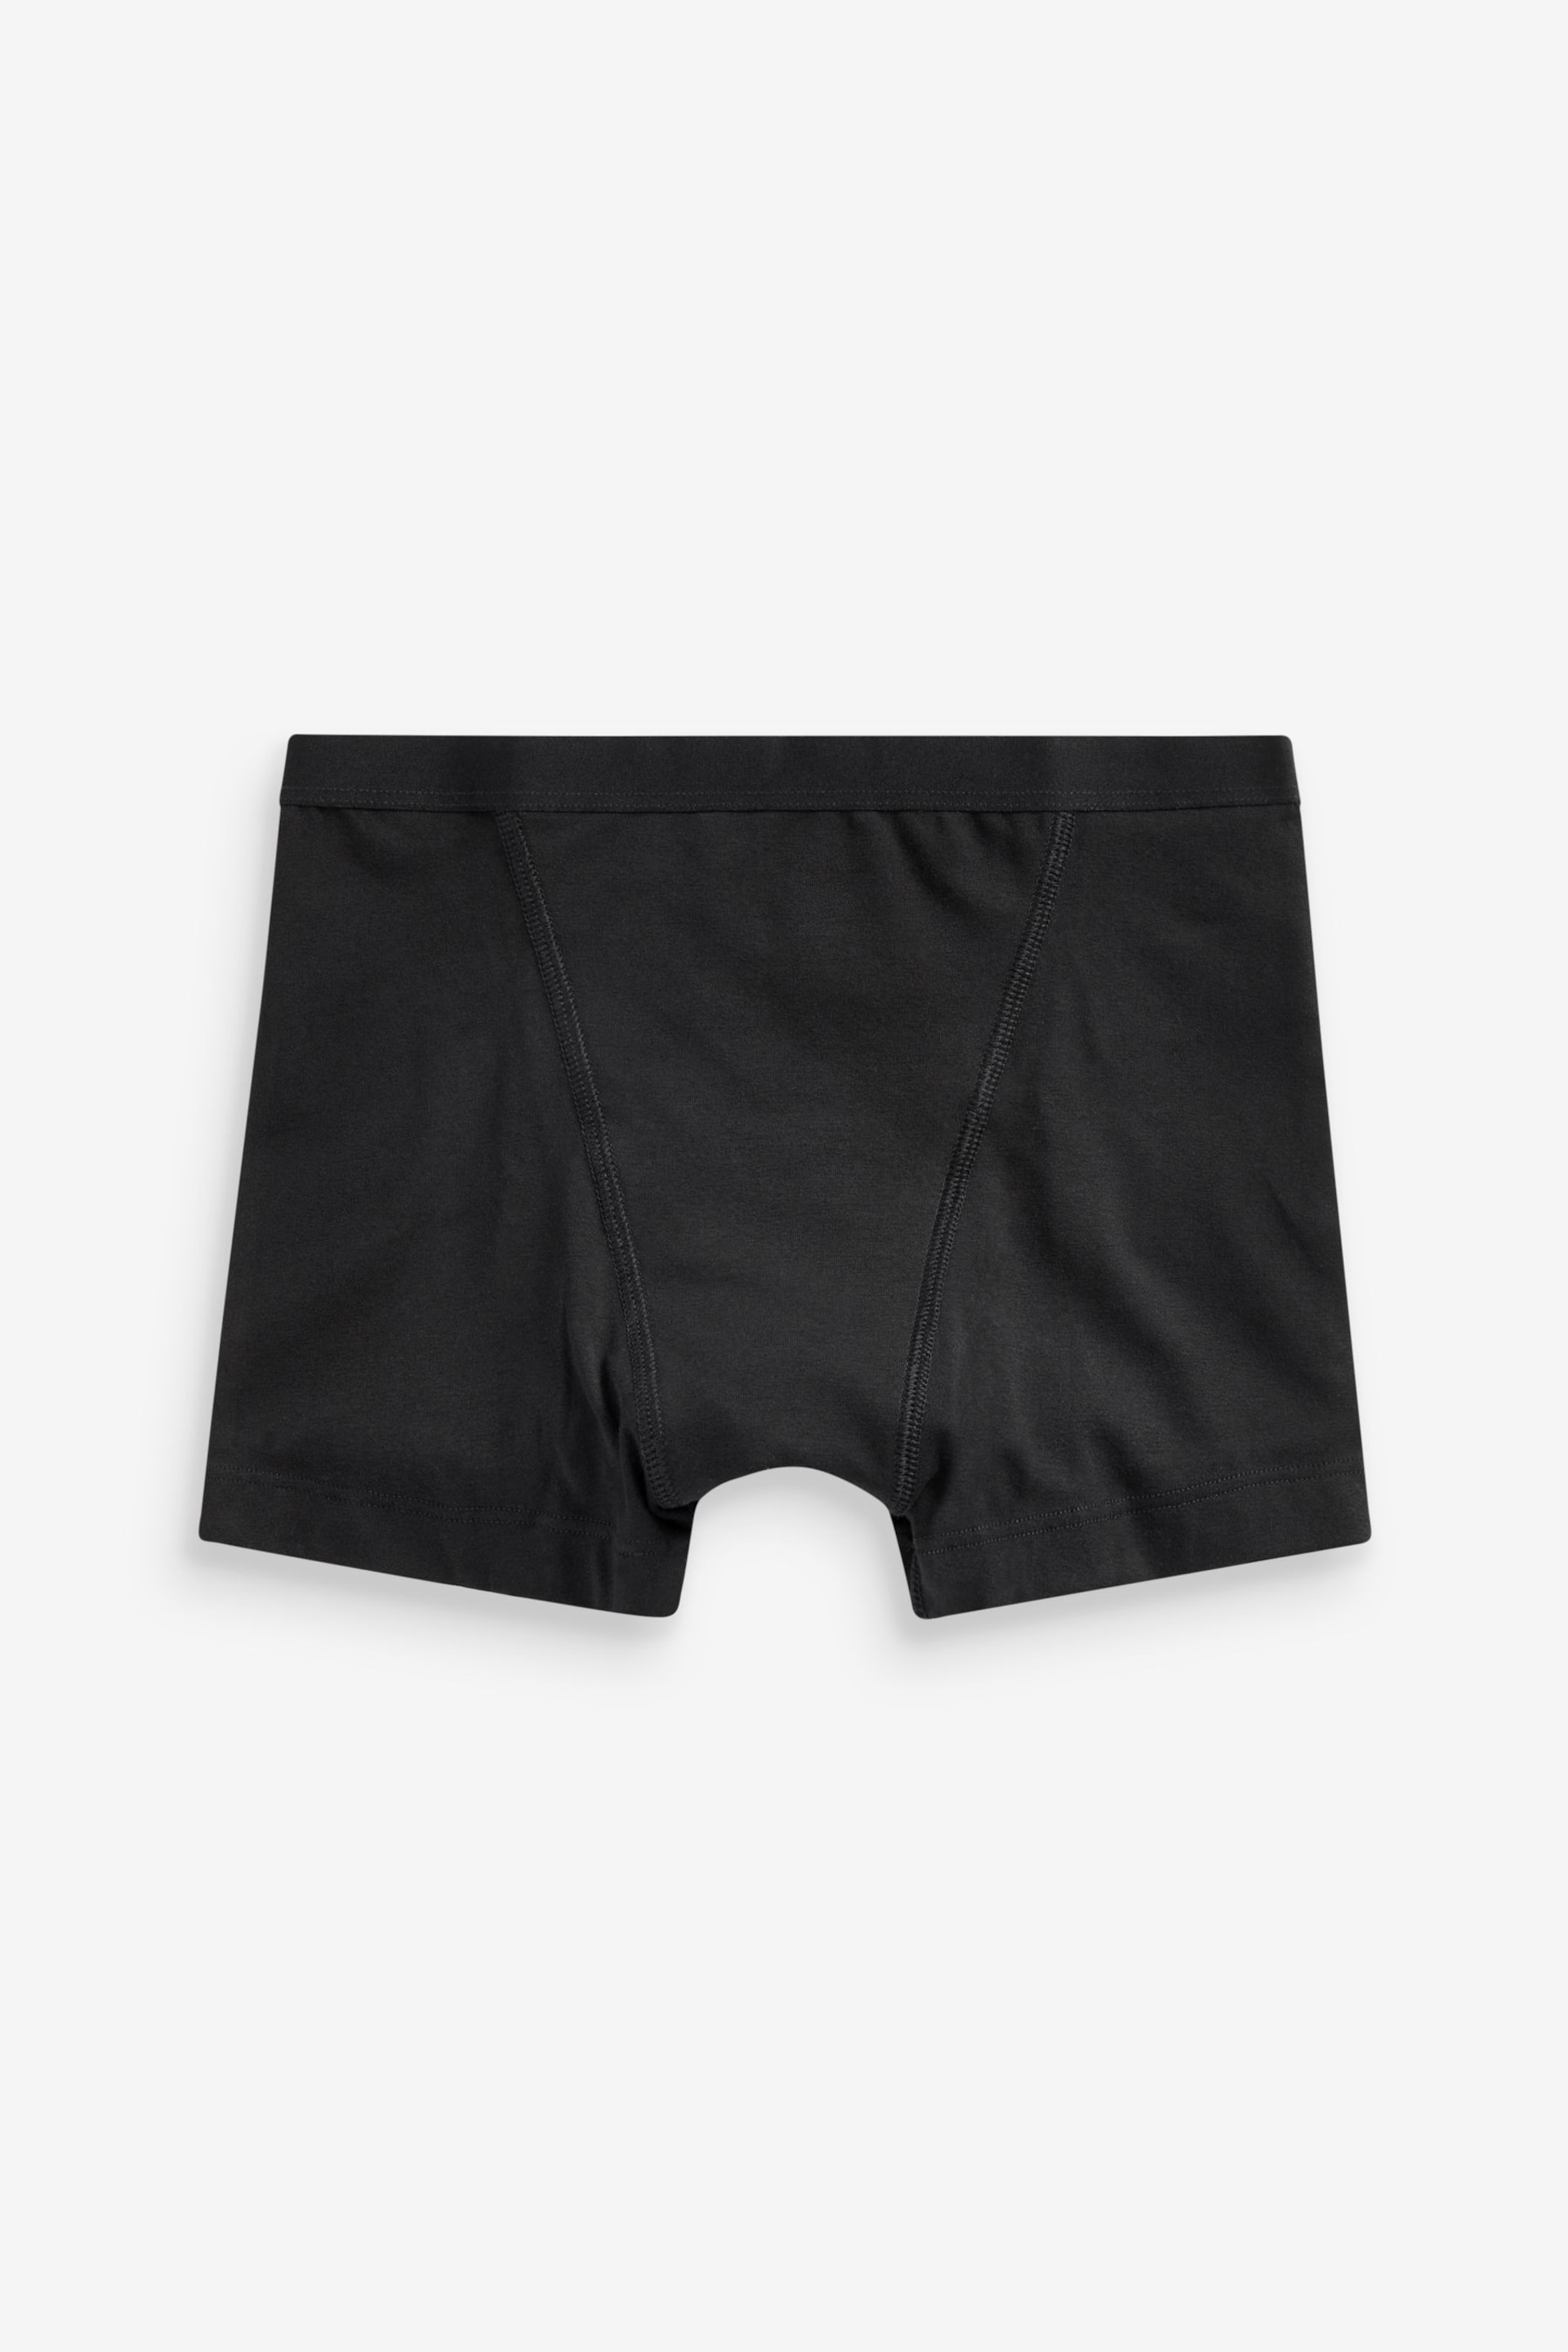 Black Shorts 2 Pack Teen Light Flow Period Pants (7-16yrs) - Image 2 of 4